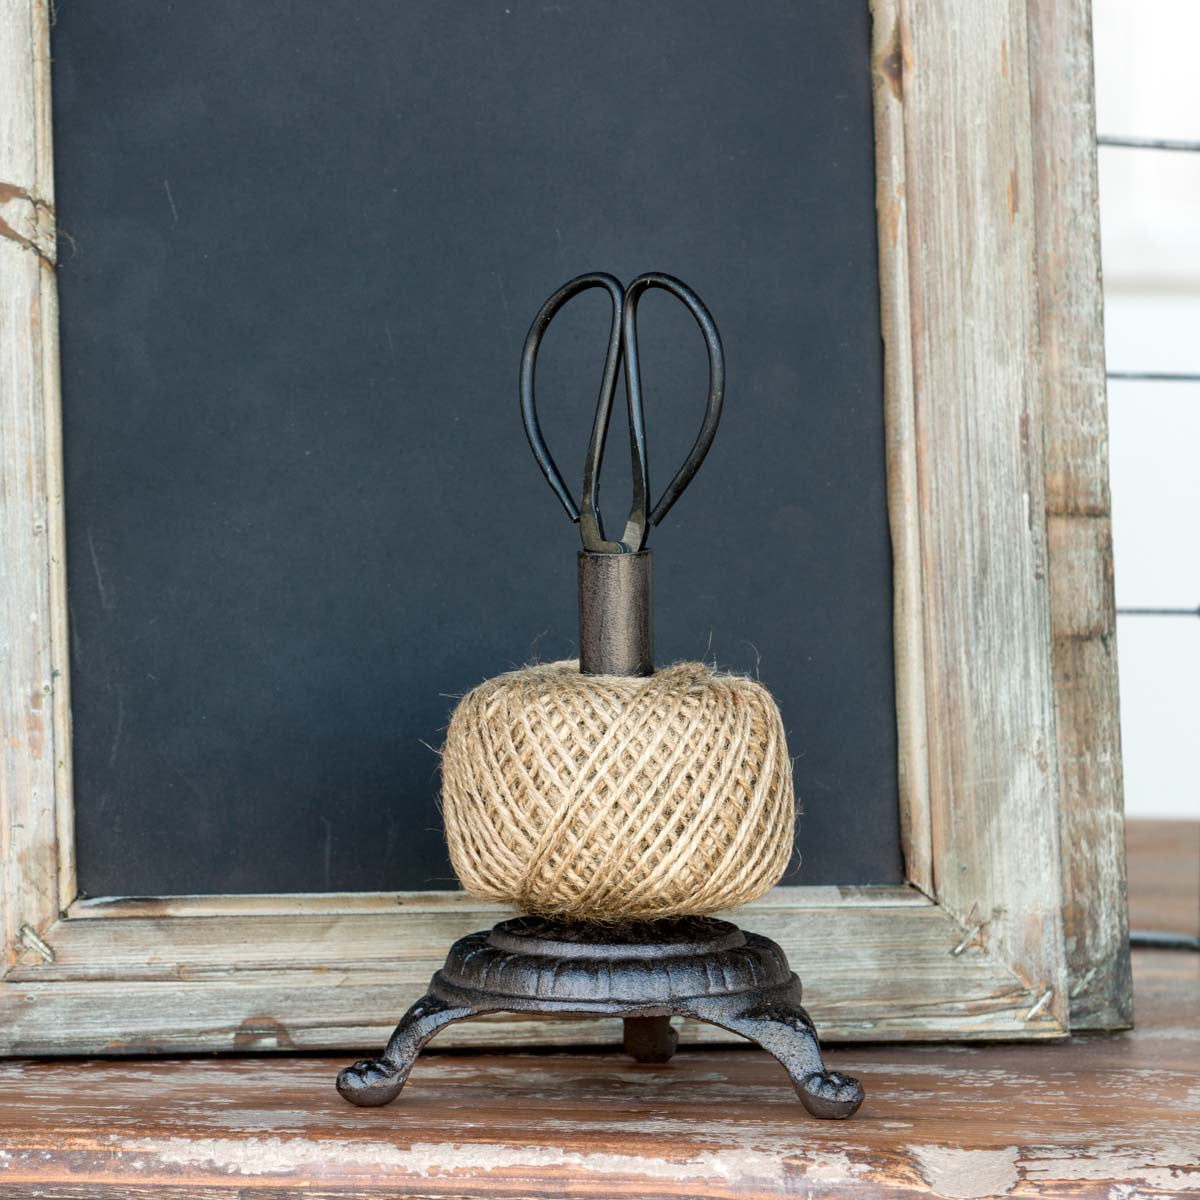 Ball of Twine on Cast Iron Stand with Scissors